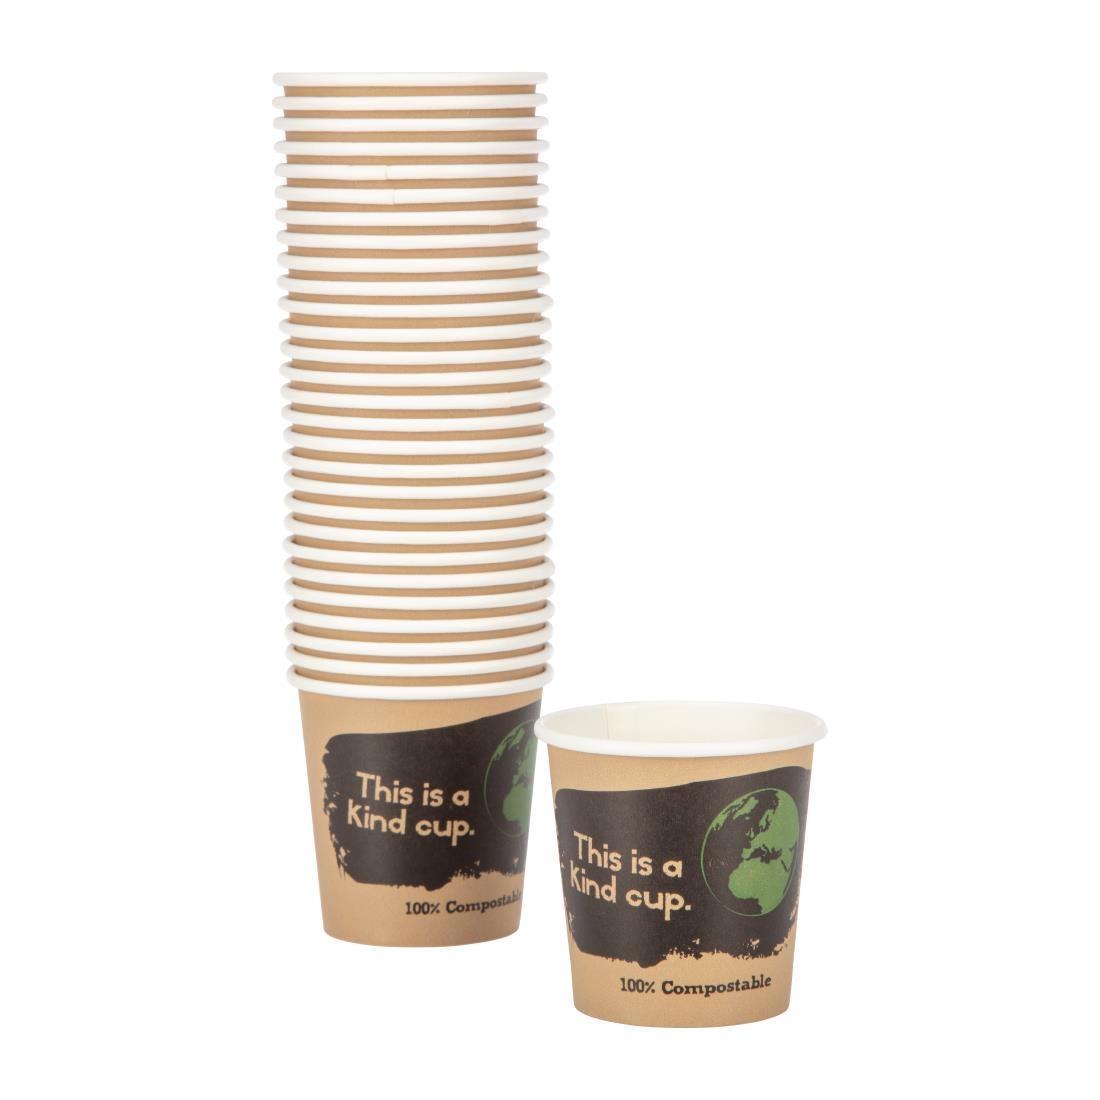 Fiesta Compostable Espresso Cups Single Wall 113ml / 4oz (Pack of 50) - DY980  - 3